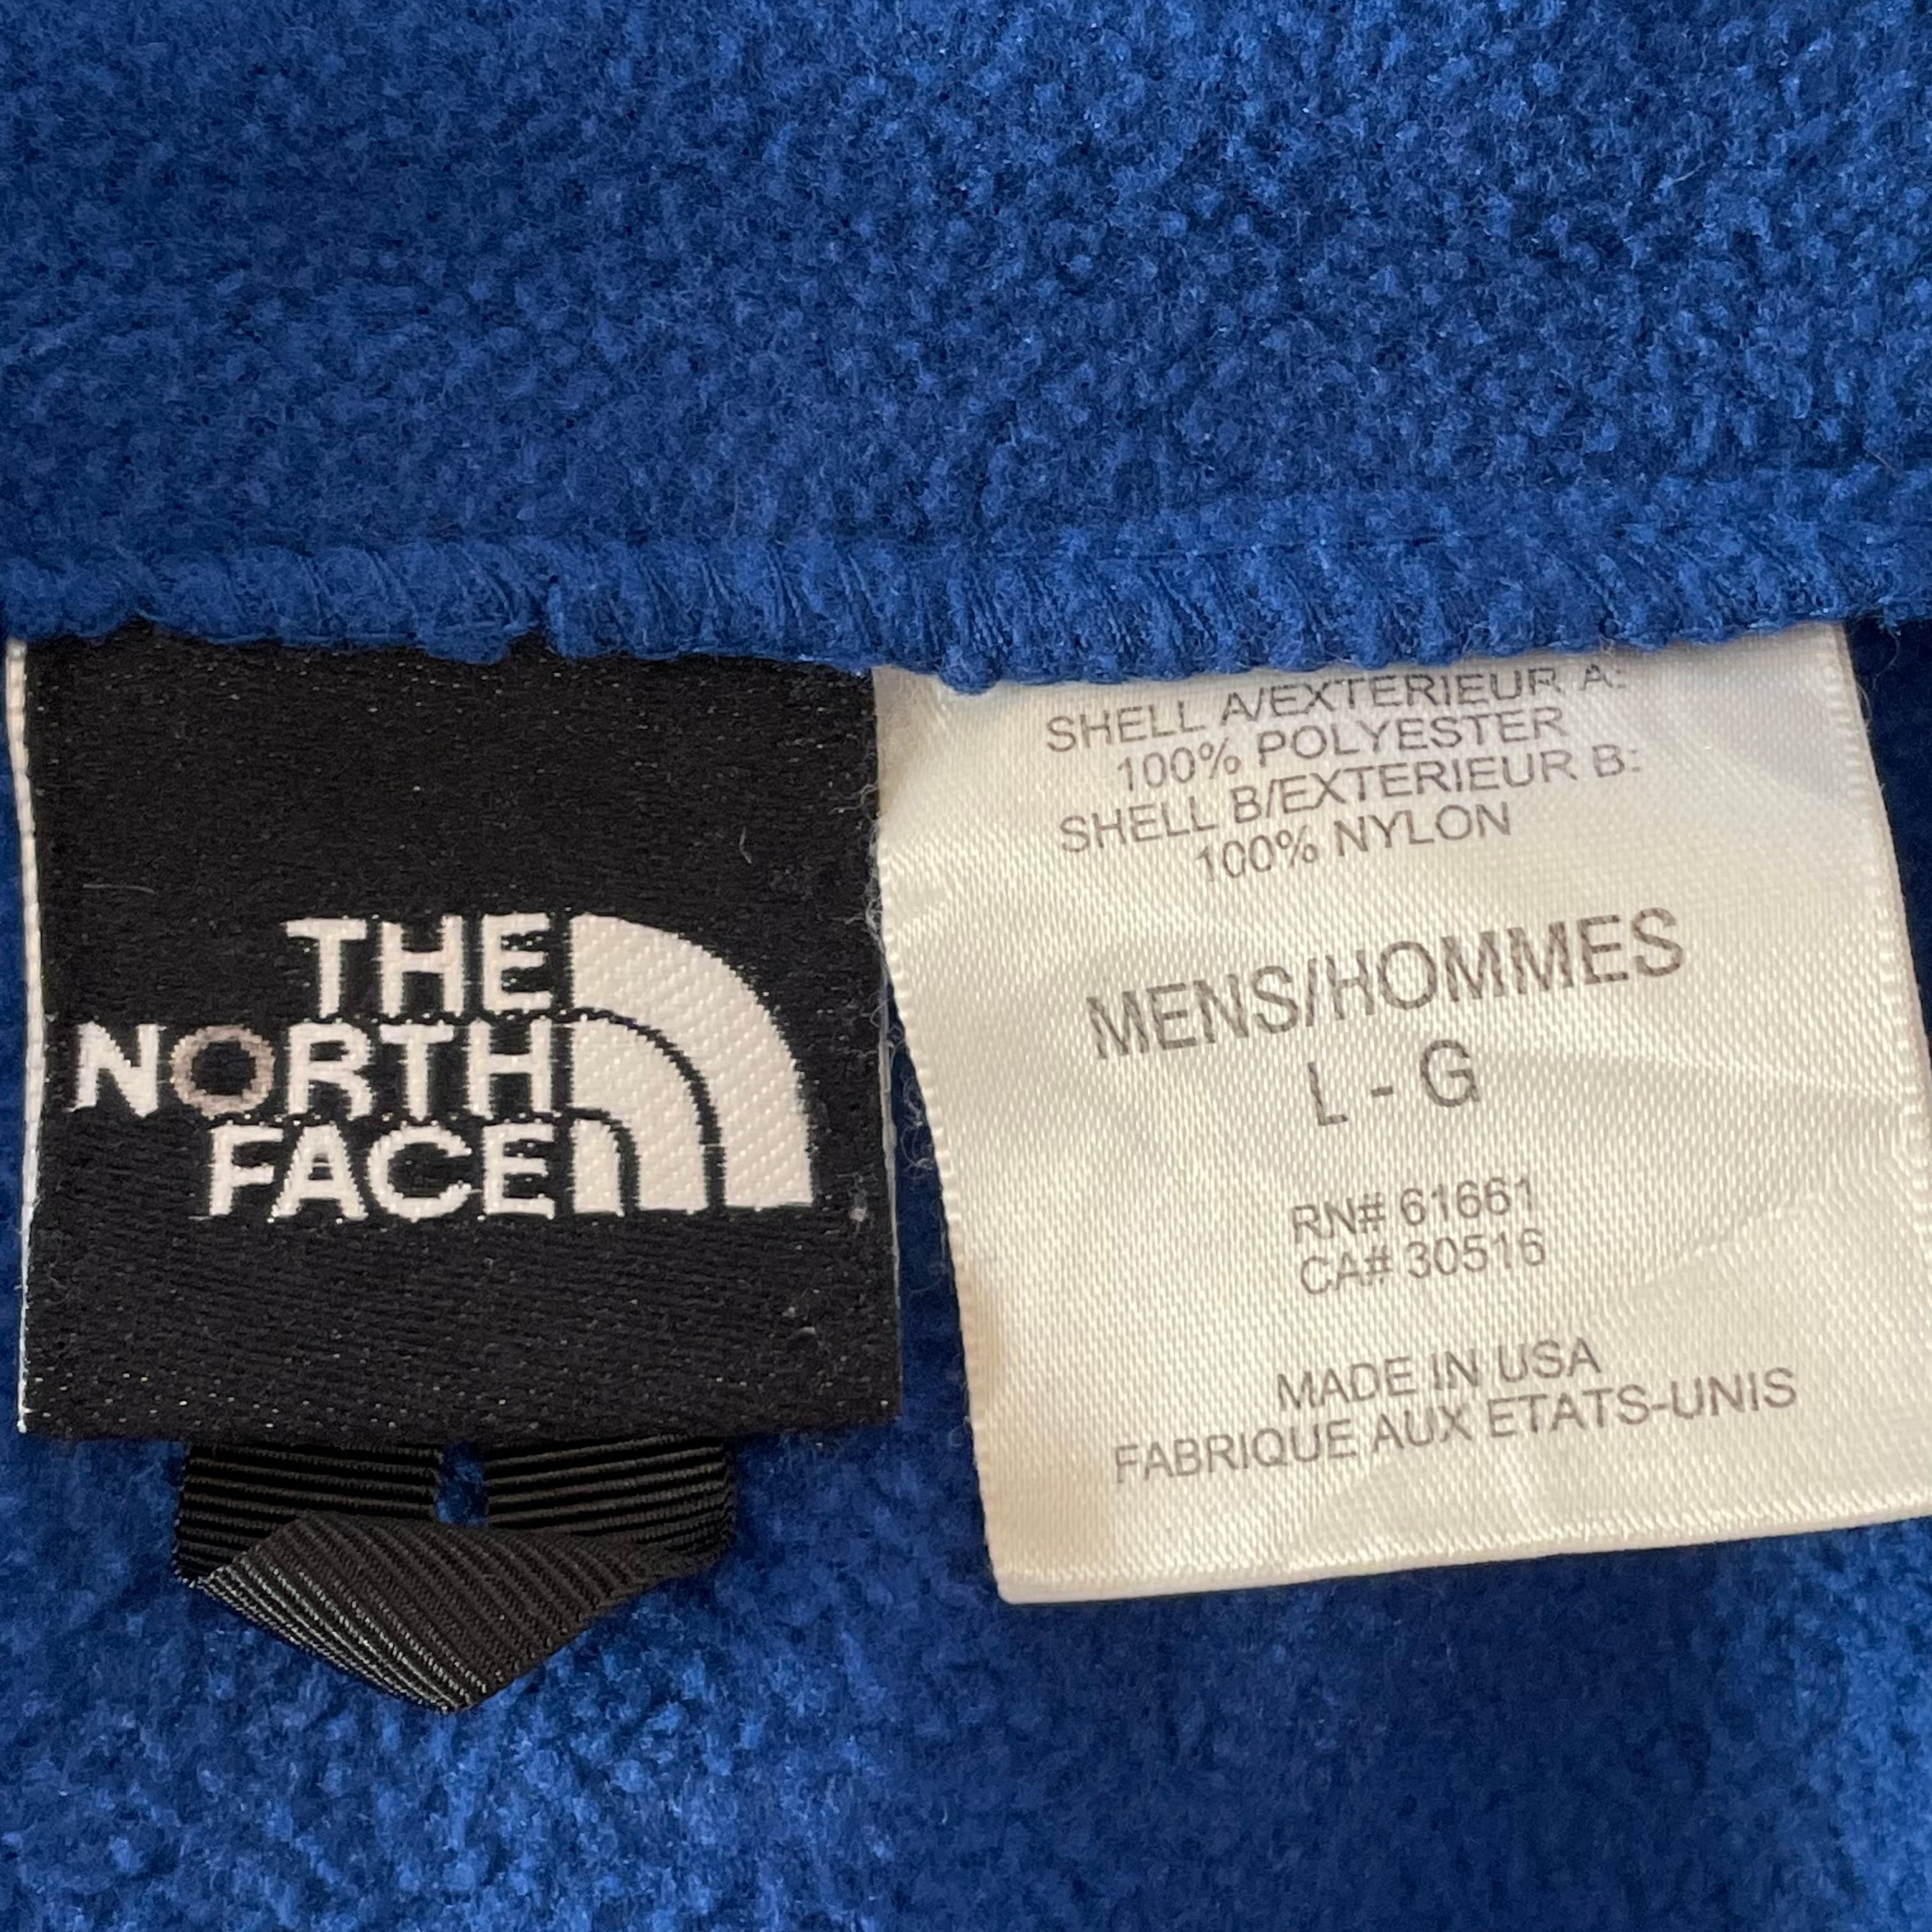 THE NORTH FACE】USA製 フリース デナリジャケット 中間着 ワン 